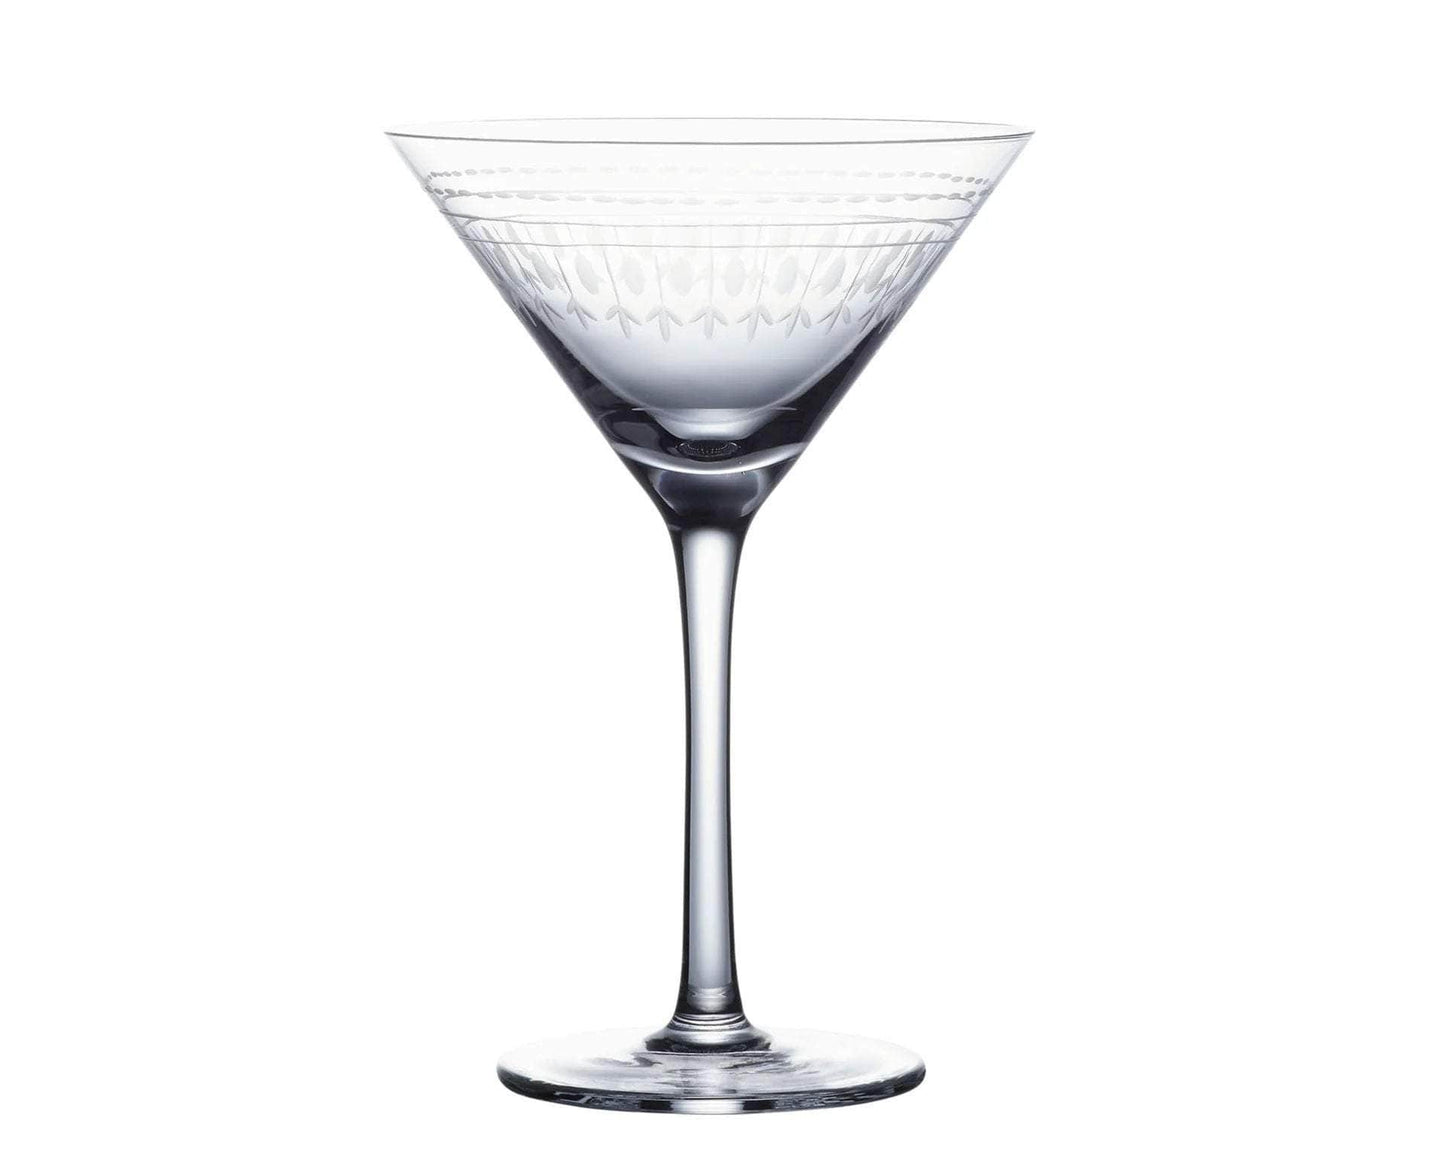 Load image into Gallery viewer, A Pair of Crystal Martini Glasses with Ovals Design
